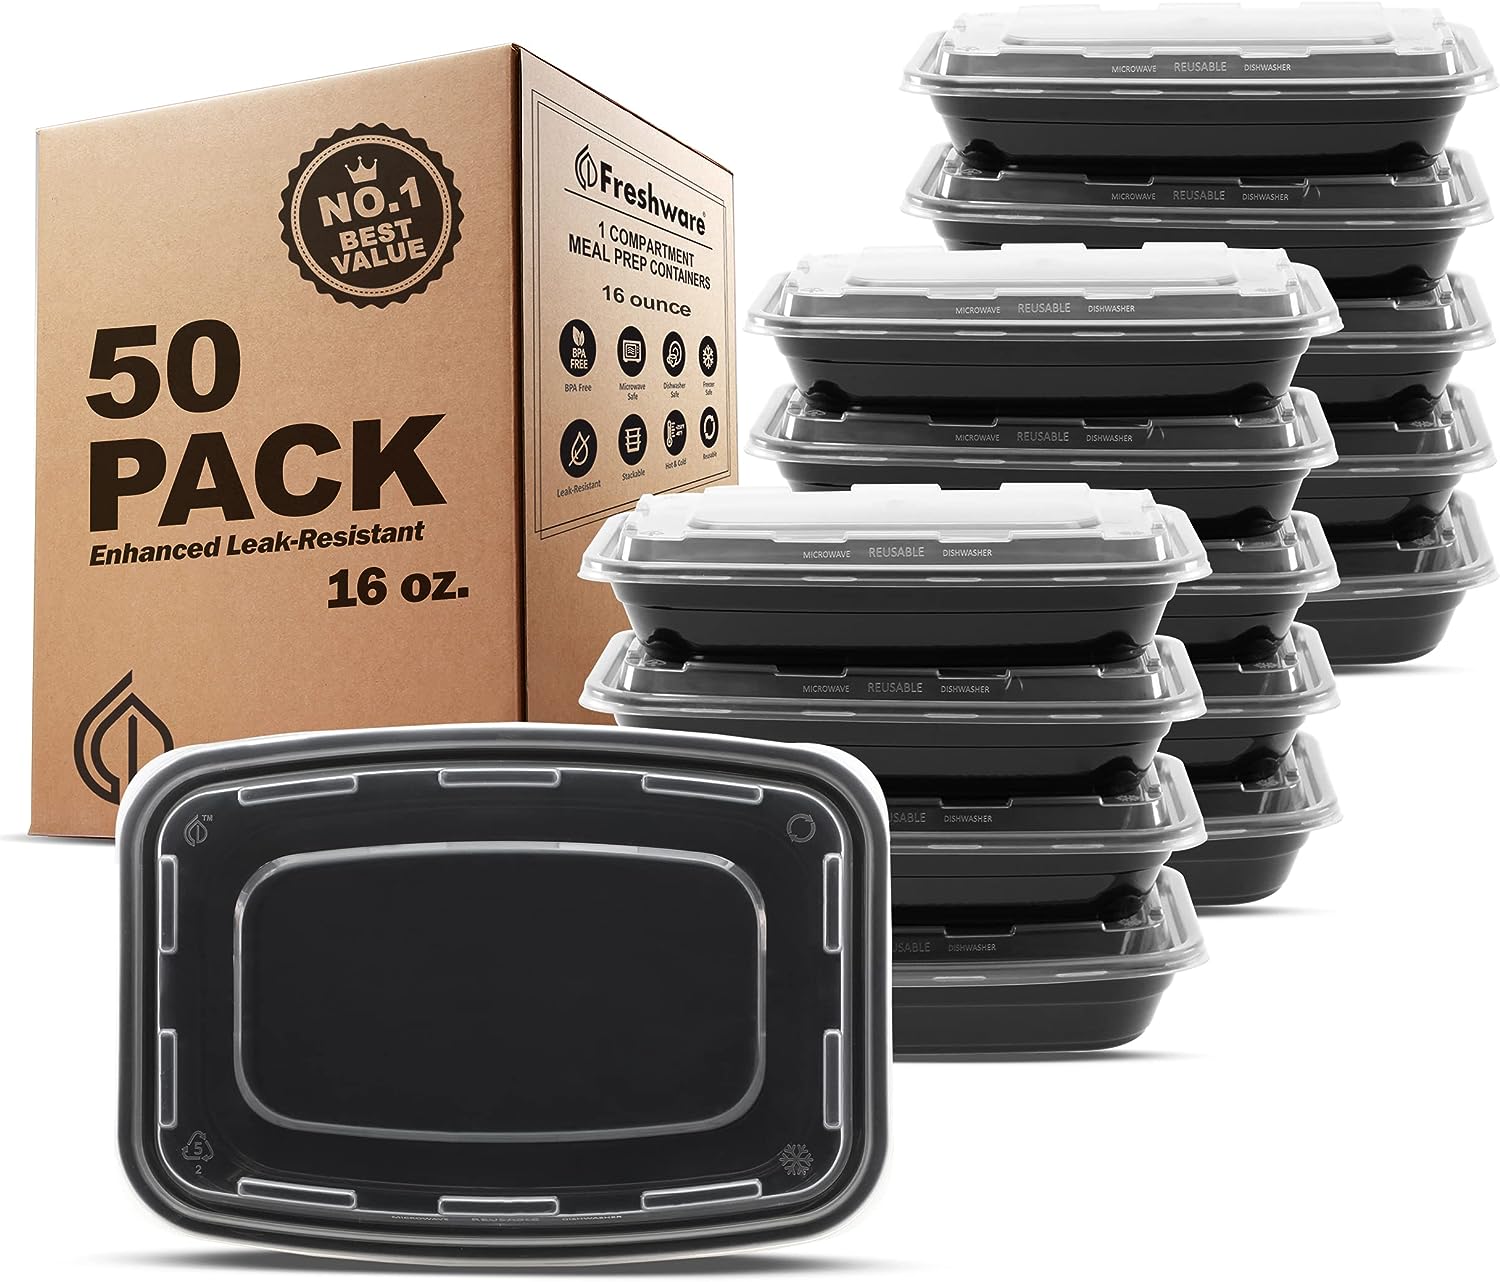 Limited-time deal: Freshware Meal Prep Containers [50 Pack] 1 Compartment Food Storage Containers with Lids, Bento Box, BPA Free, Stackable, Microwave/Dishwasher/Freezer  - $12.46